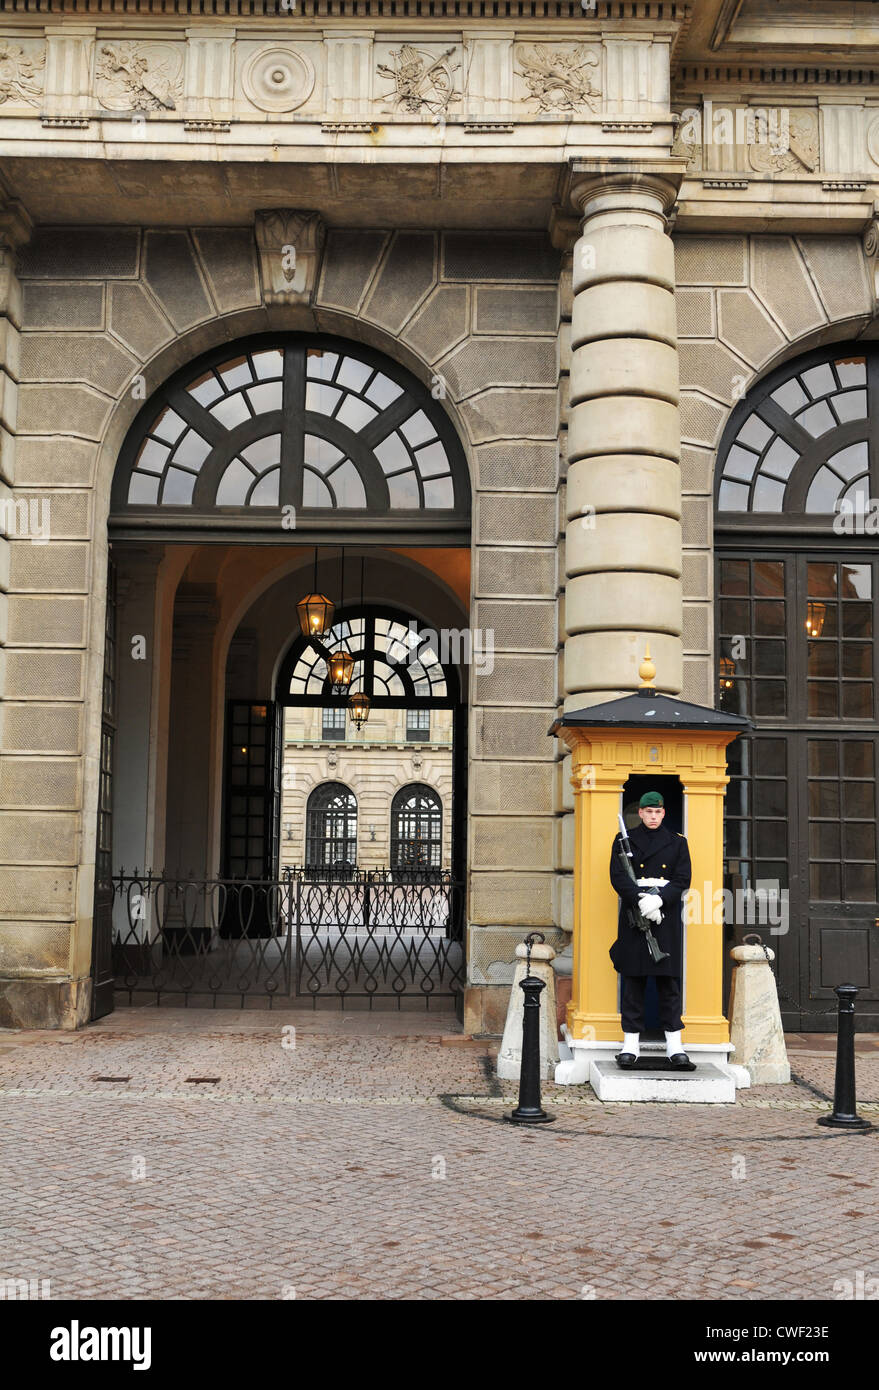 Stockholm, Sweden - 14 Dec, 2011: Guards at the Royal Palace (Stockholms  or Kungliga Stock Photo